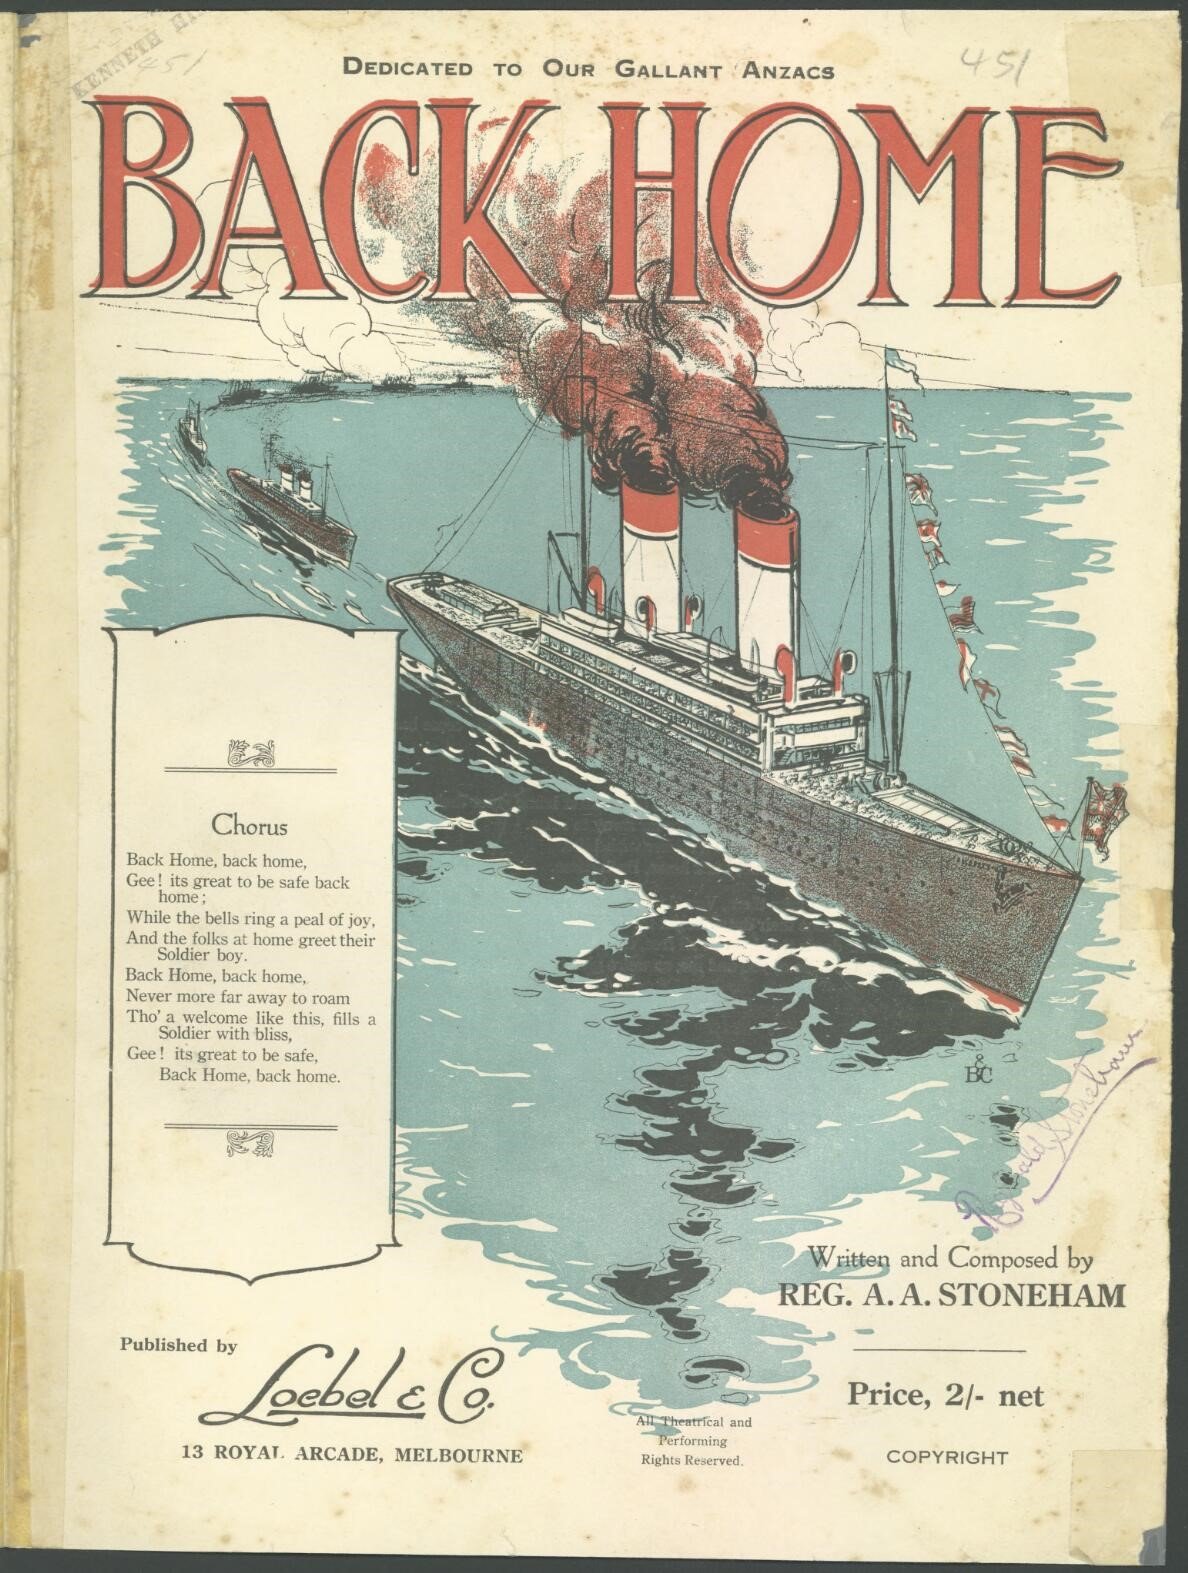 Cover of sheet music